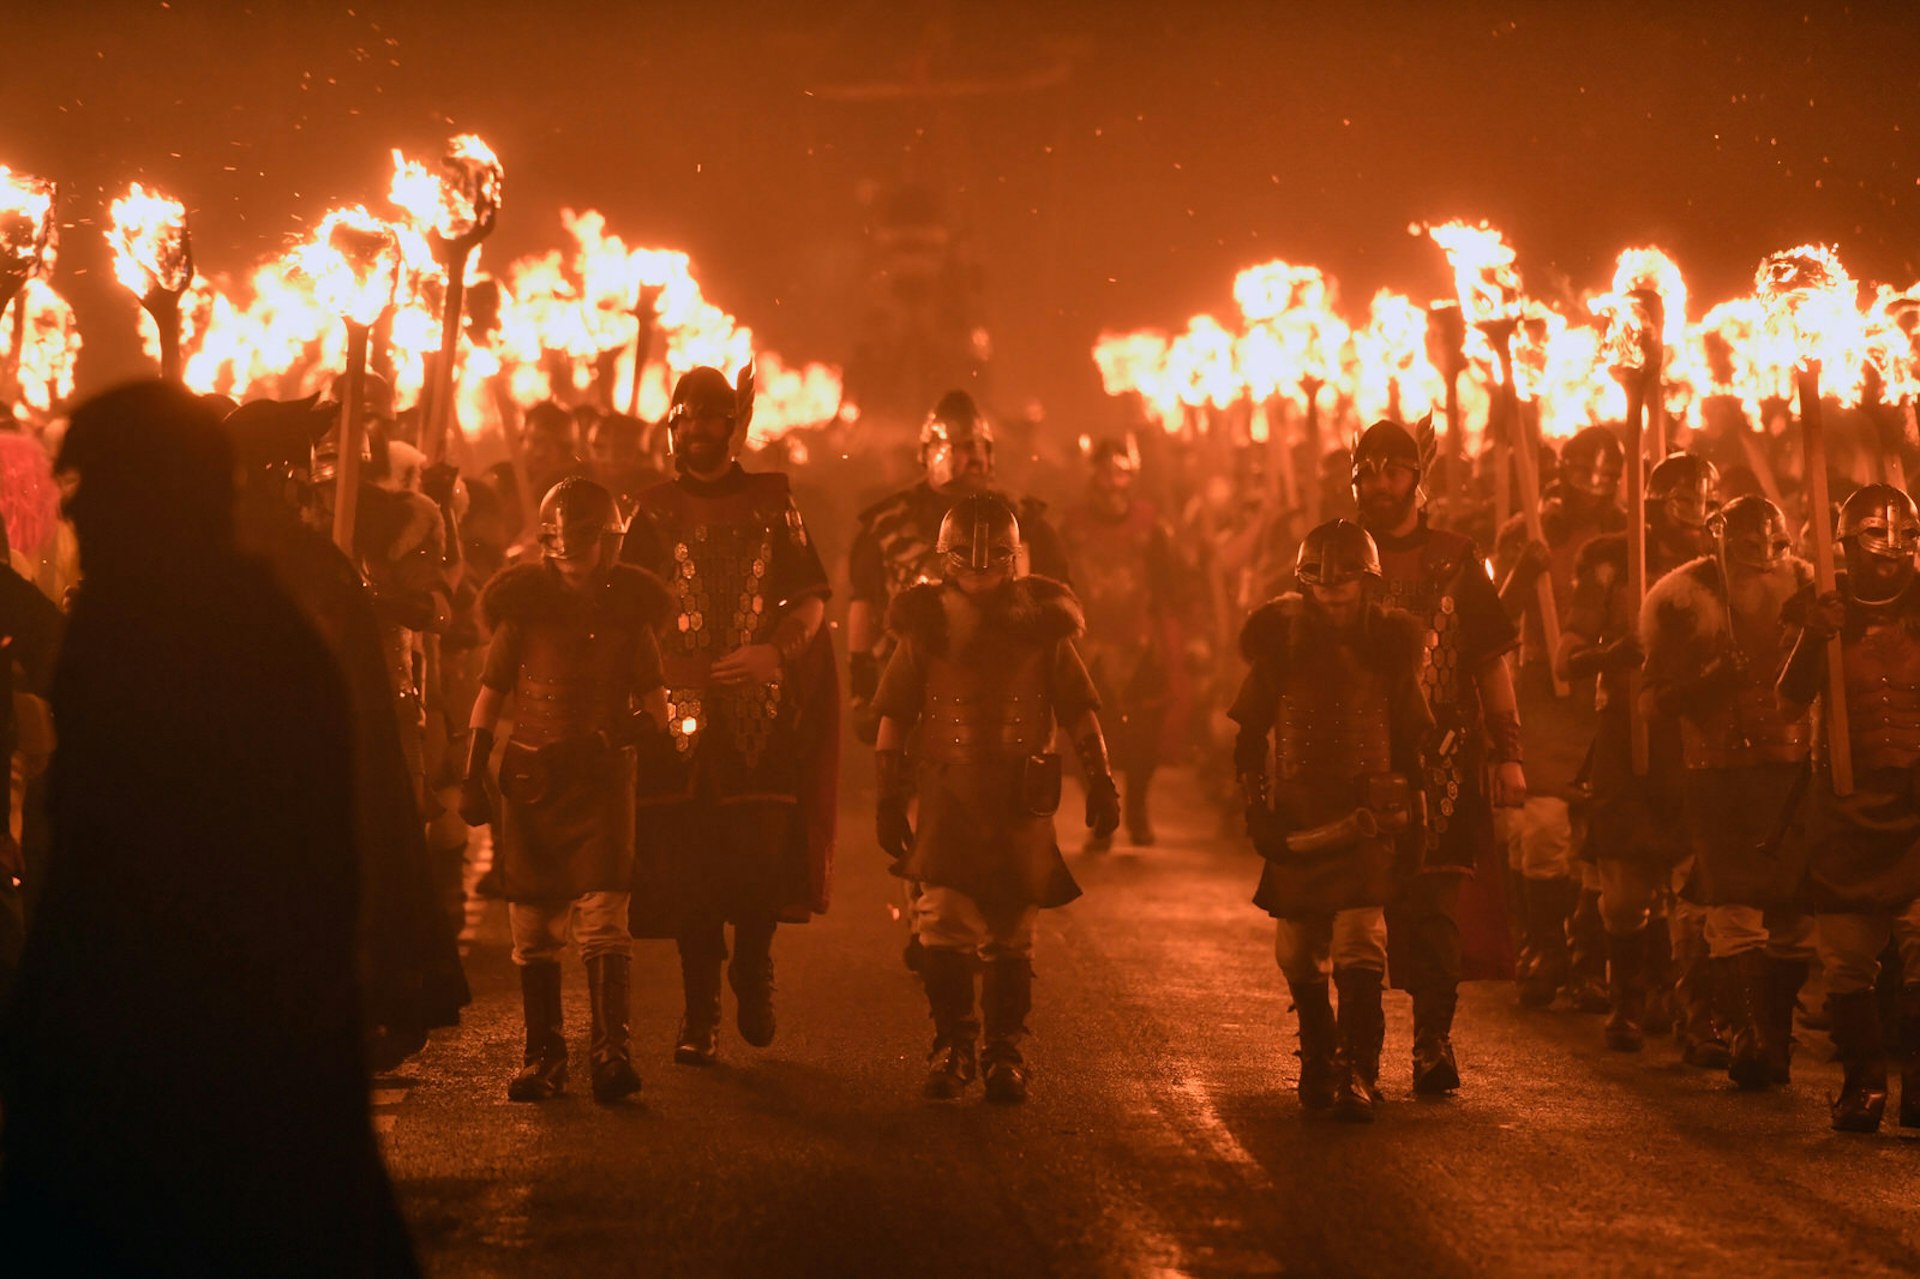 Jarl Squad Up Helly Aa Festival